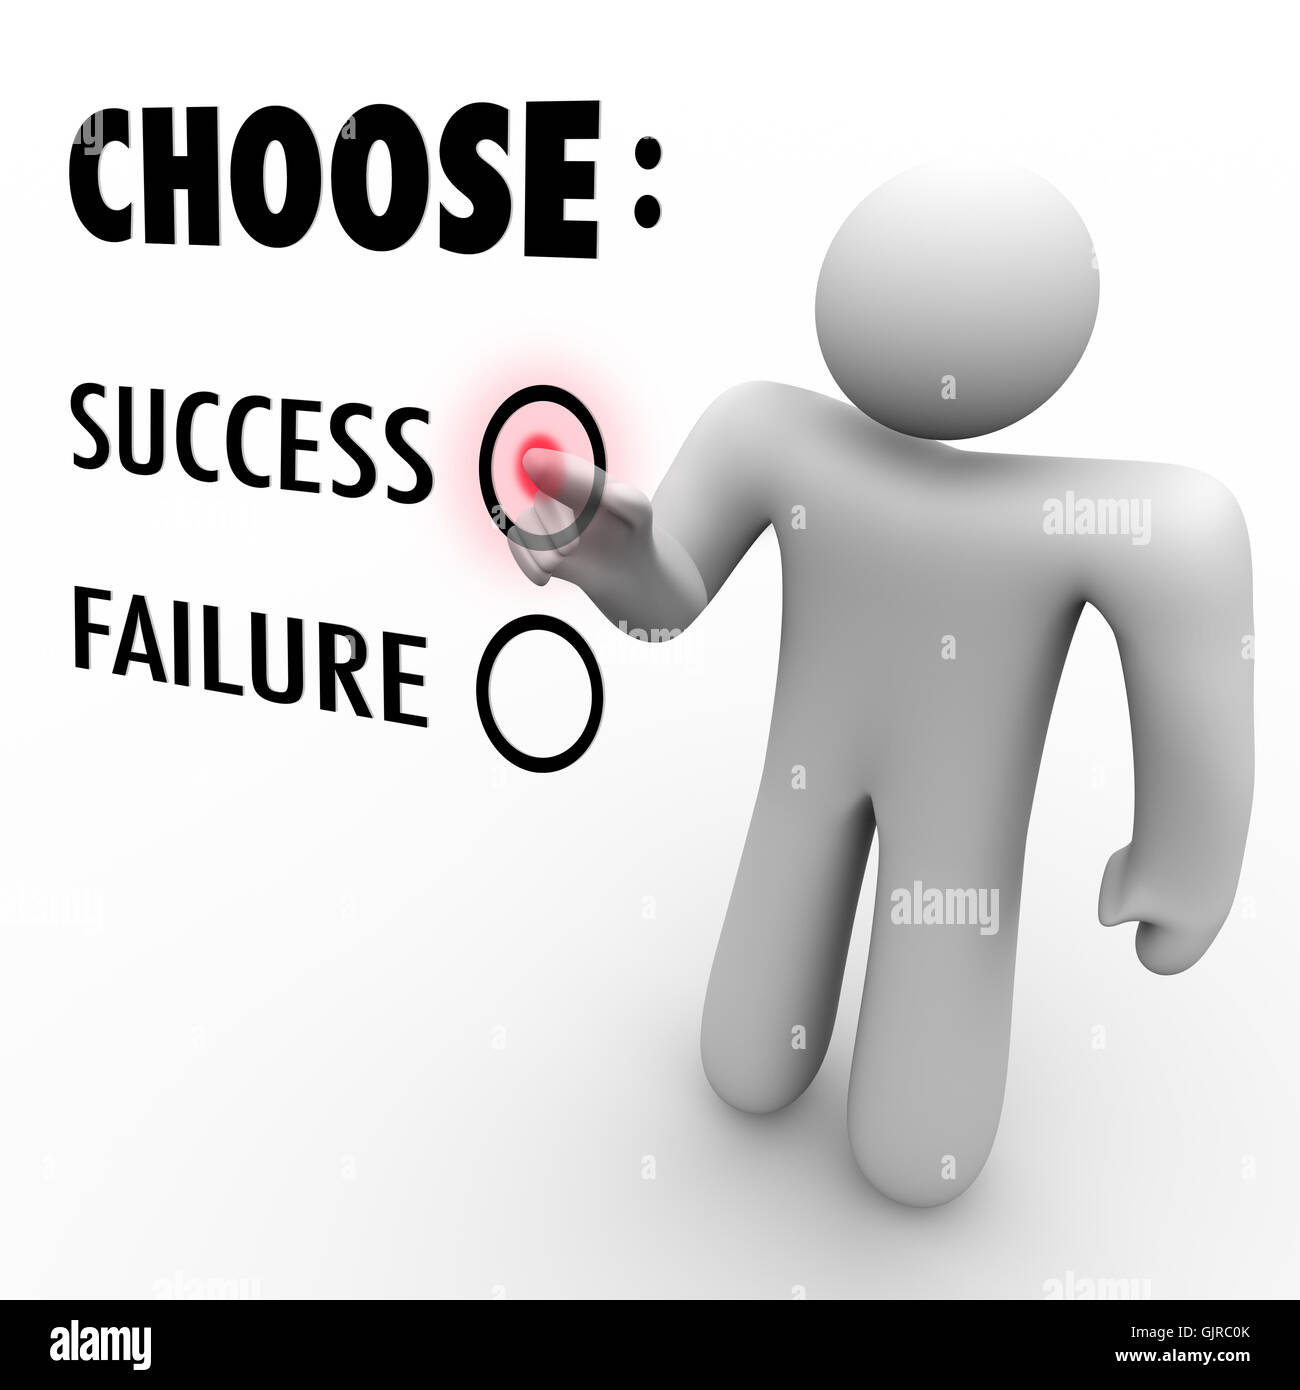 Choose Success Or Failure - Man at Touch Screen Stock Photo